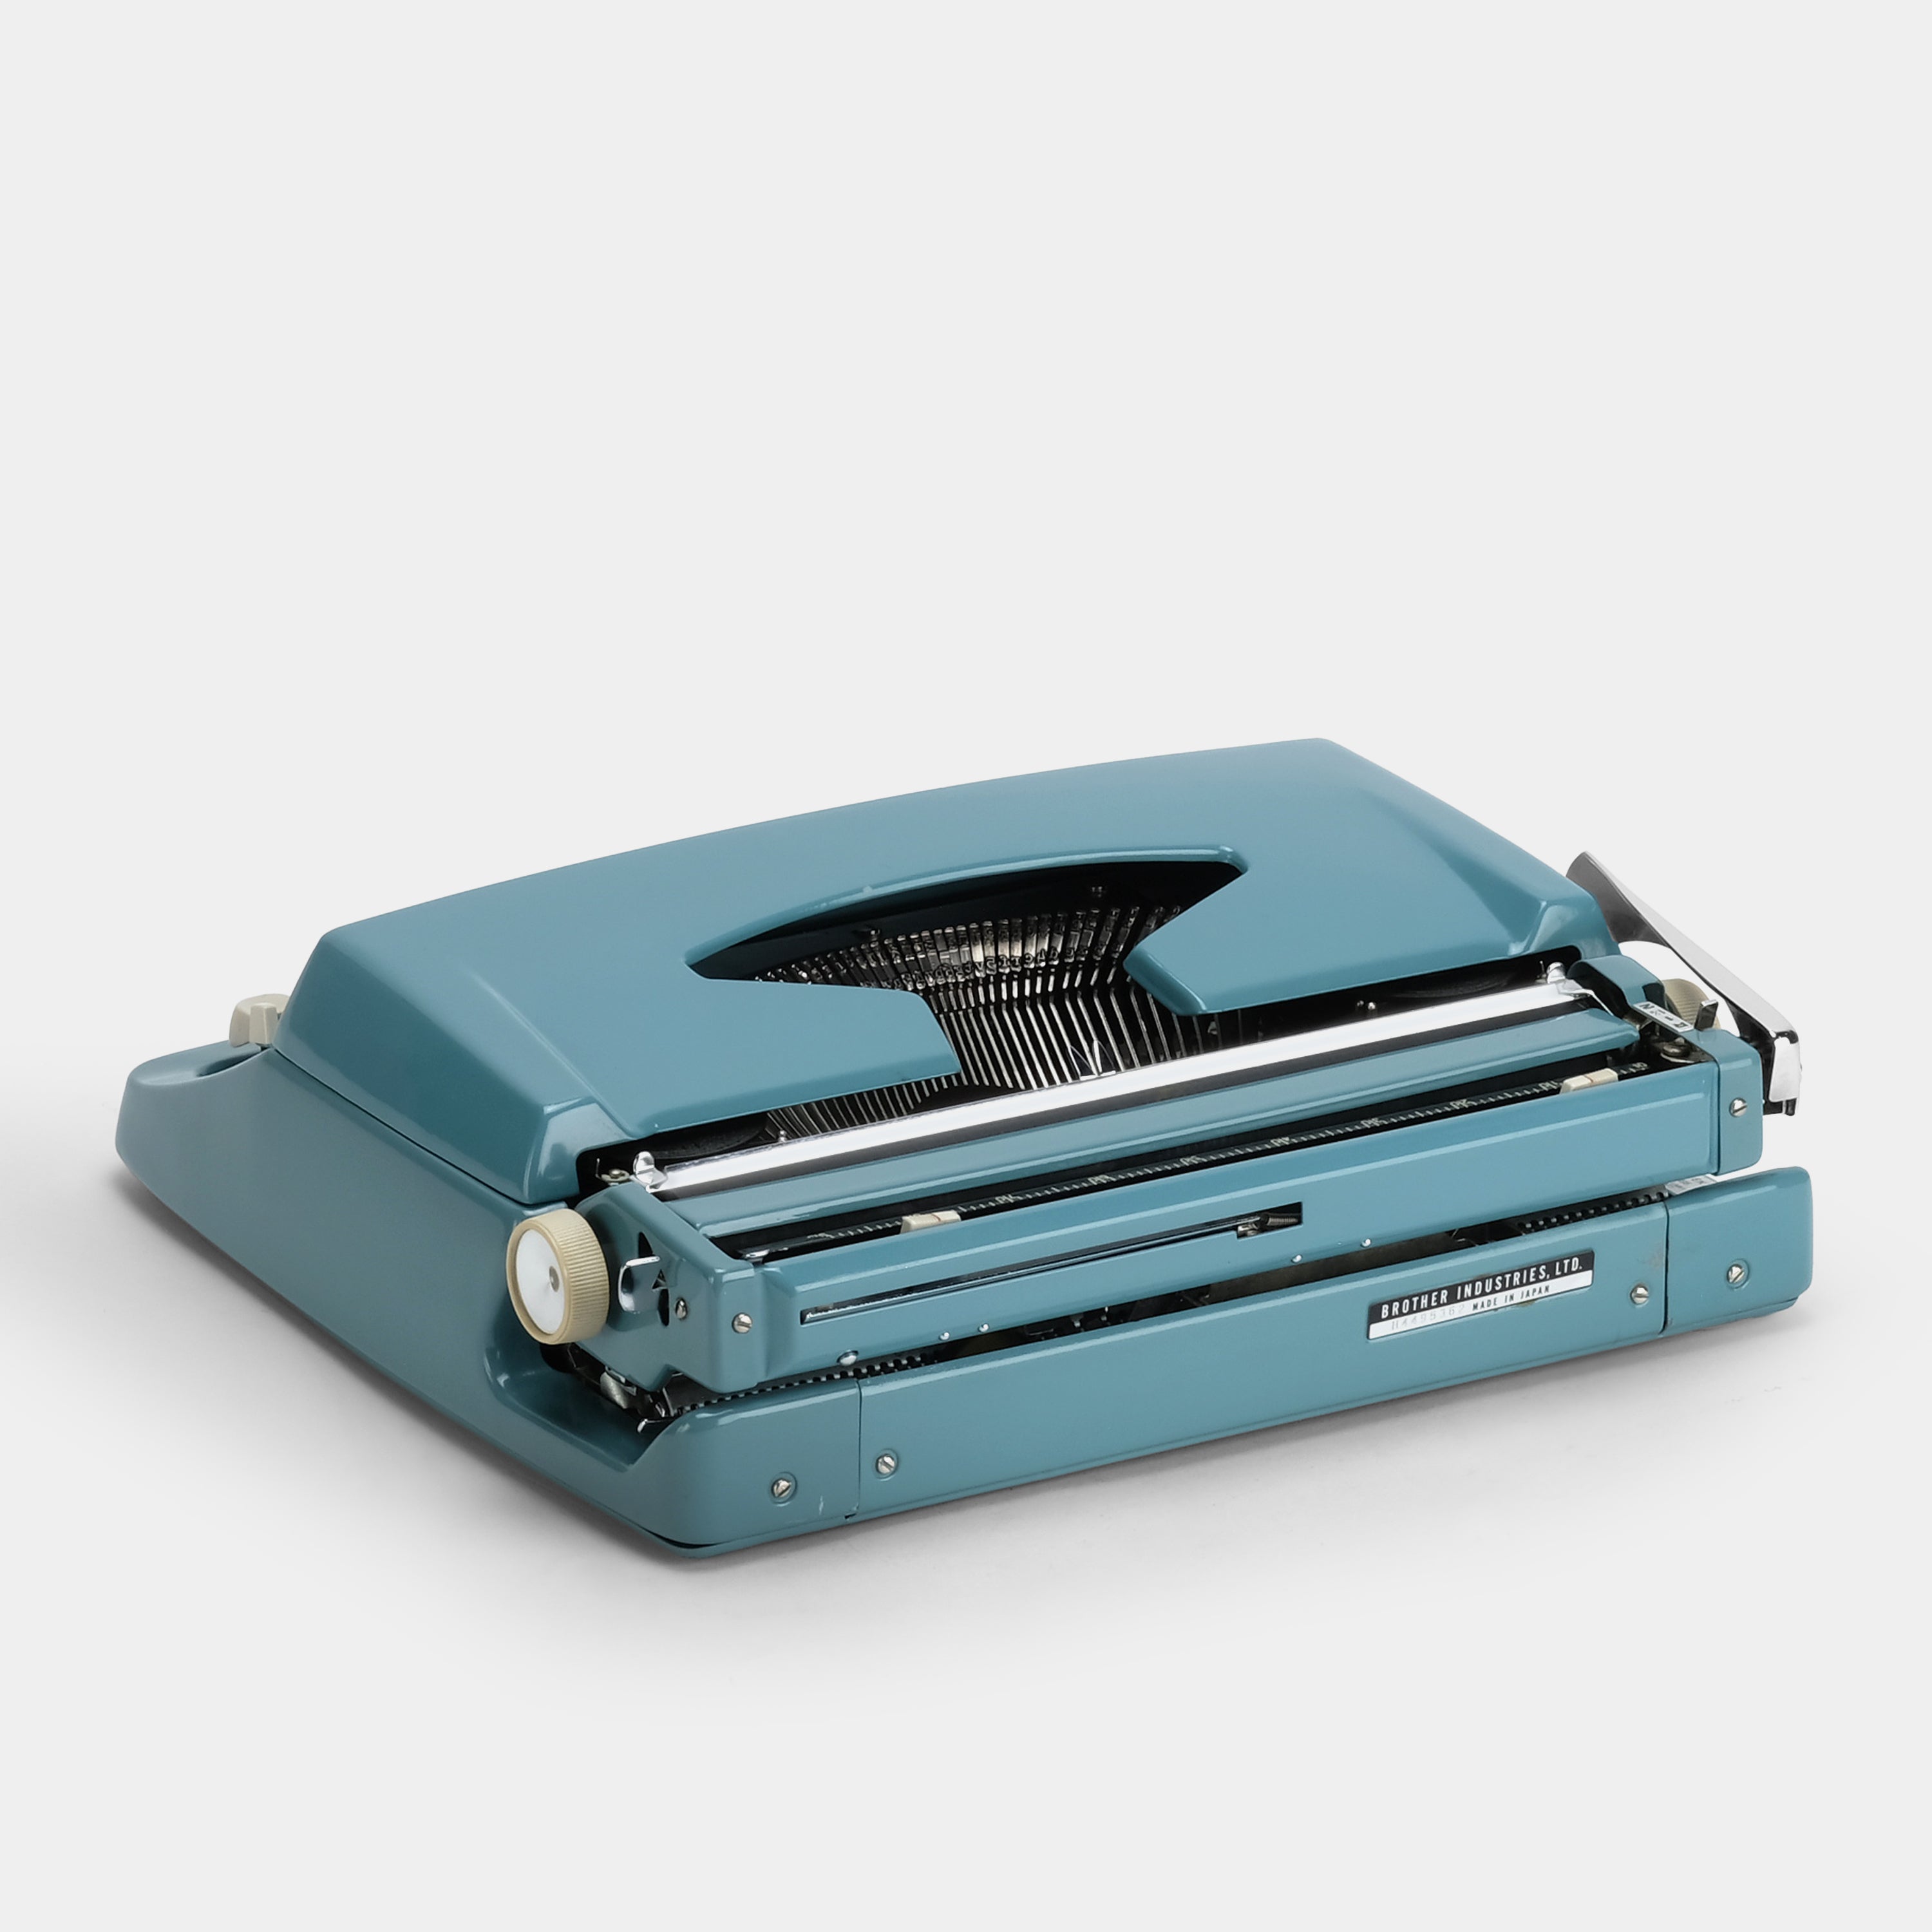 Brother De Luxe Teal Manual Typewriter and Case